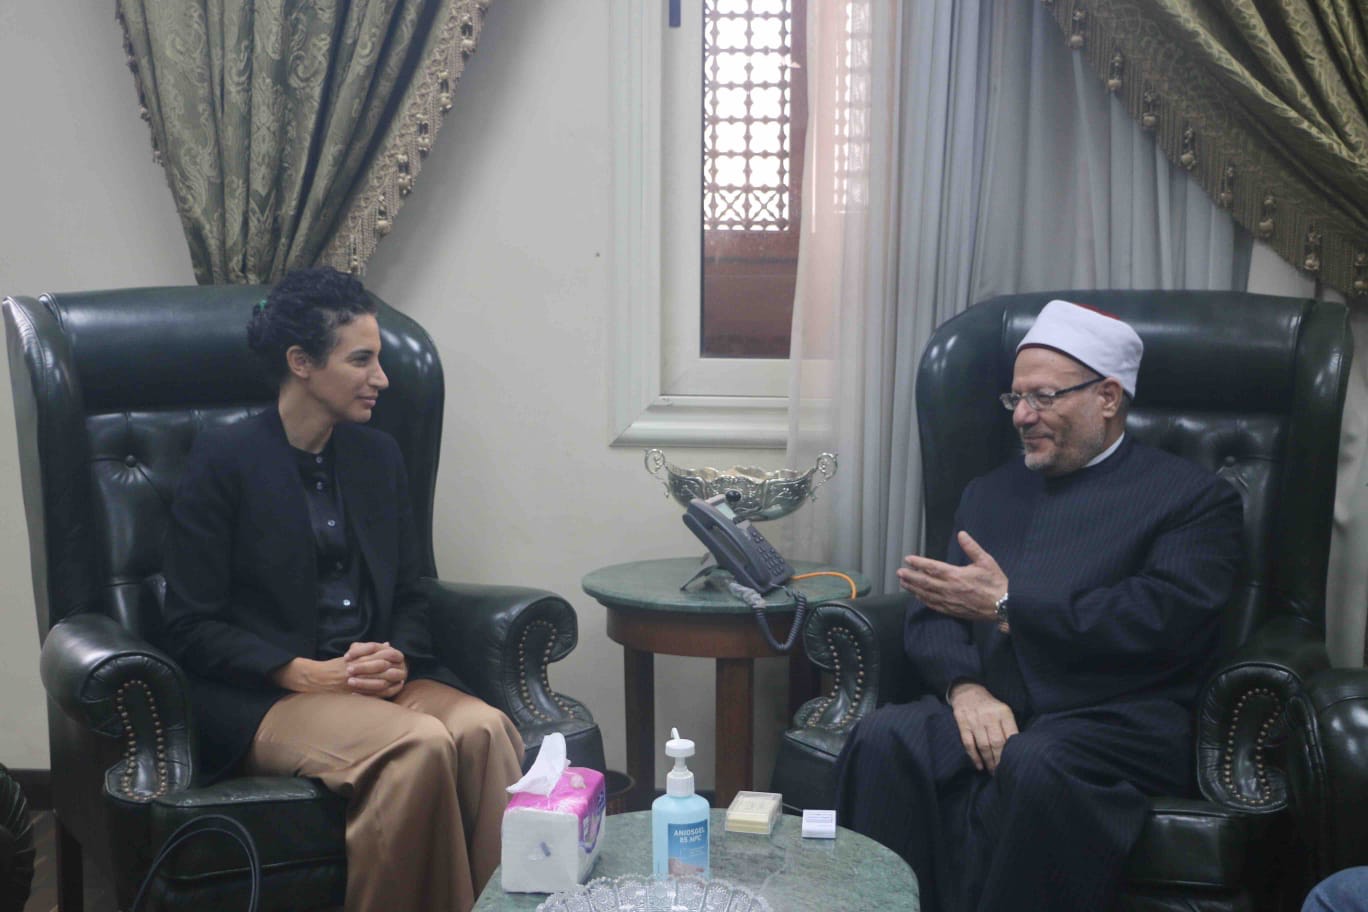 Egypt’s Mufti meets with Cyprus’s ambassador to Cairo, discuss means of religious cooperation